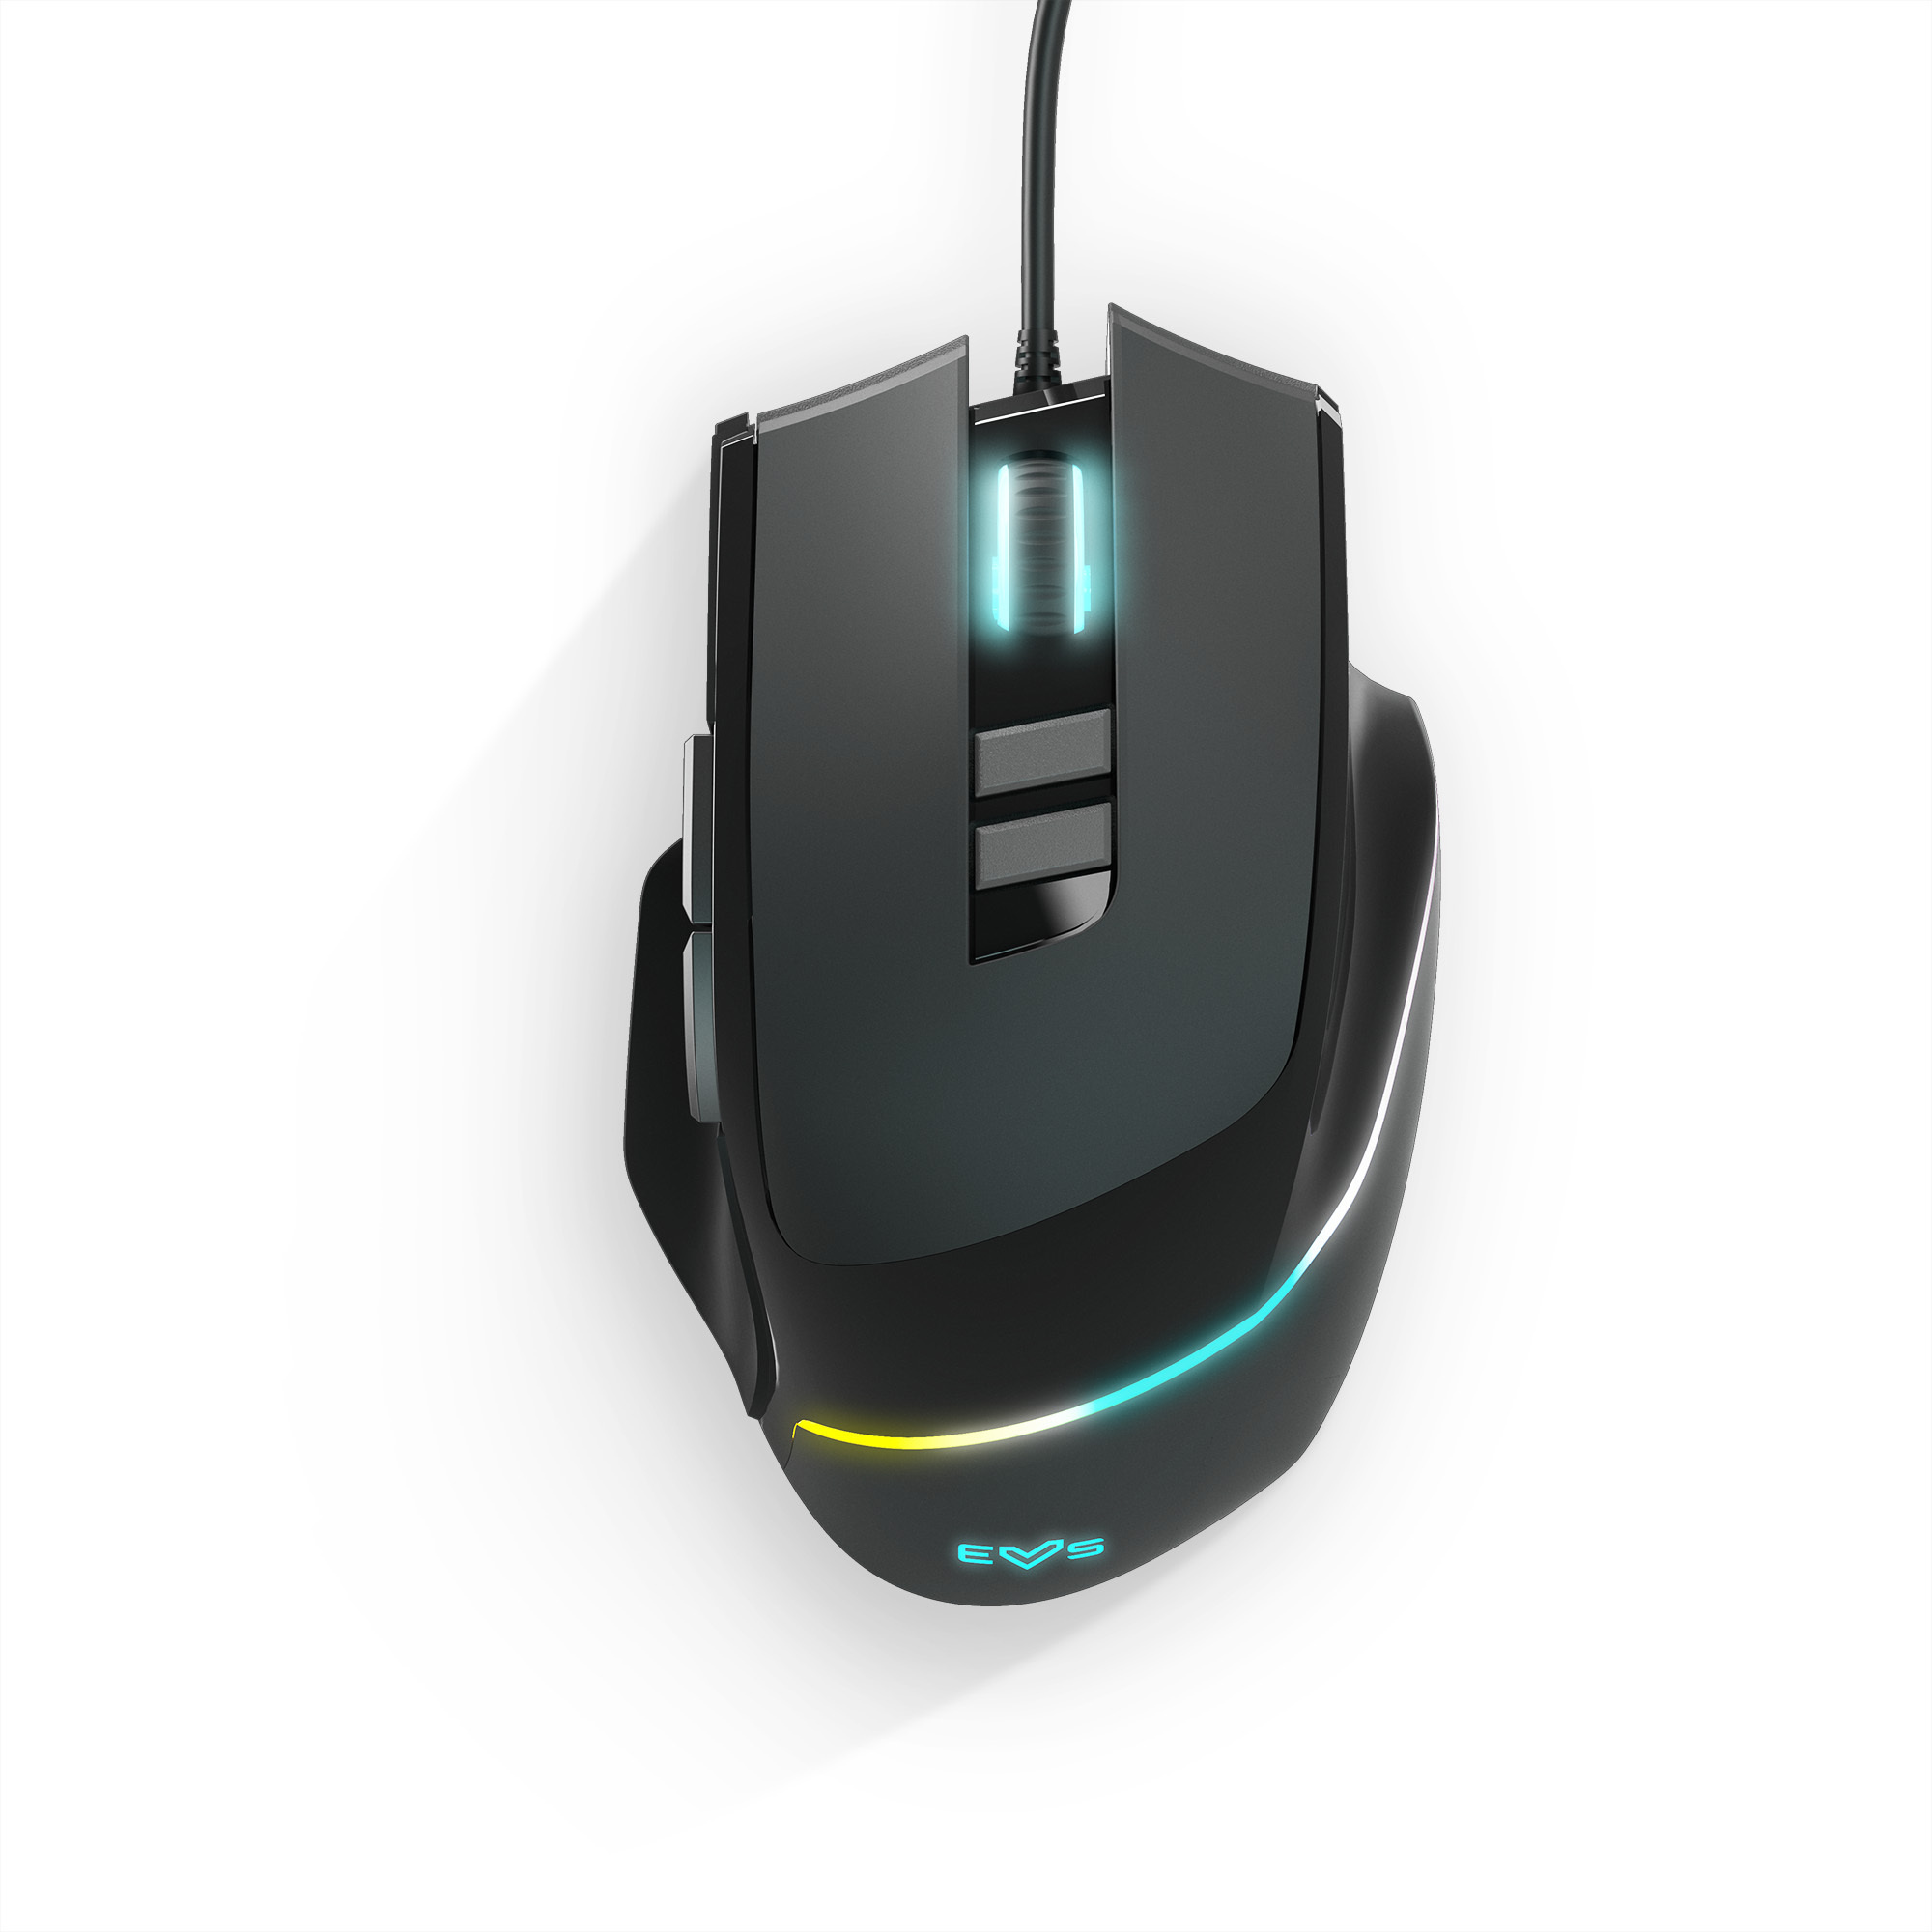 PC mouse with RGB LEDs featuring several light effects